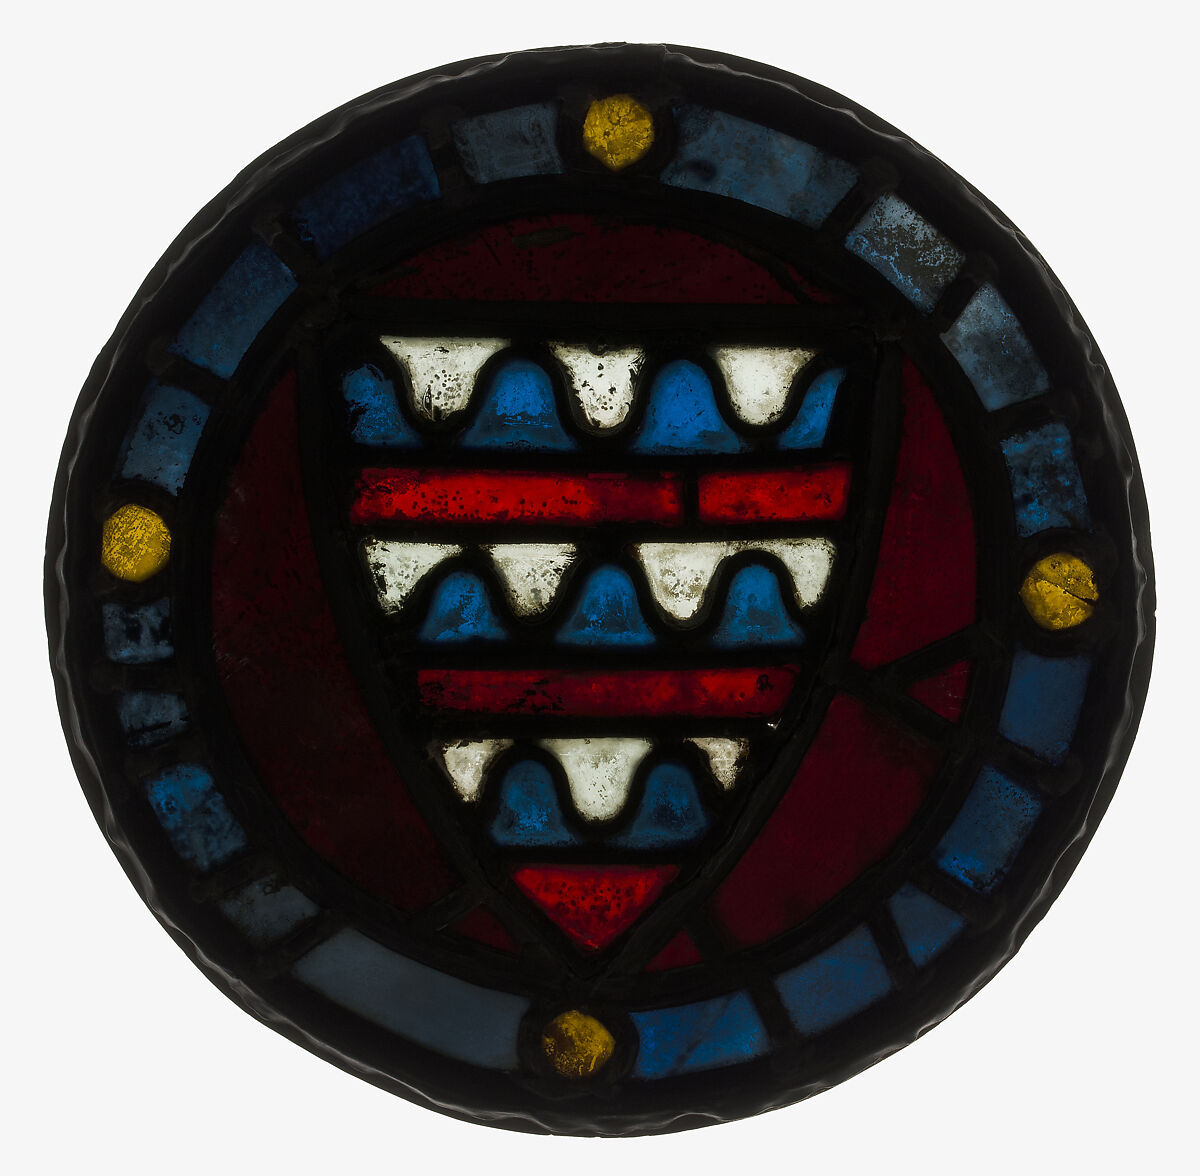 Roundel with the Arms of Coucy, Pot-metal glass and vitreous paint, British (?)